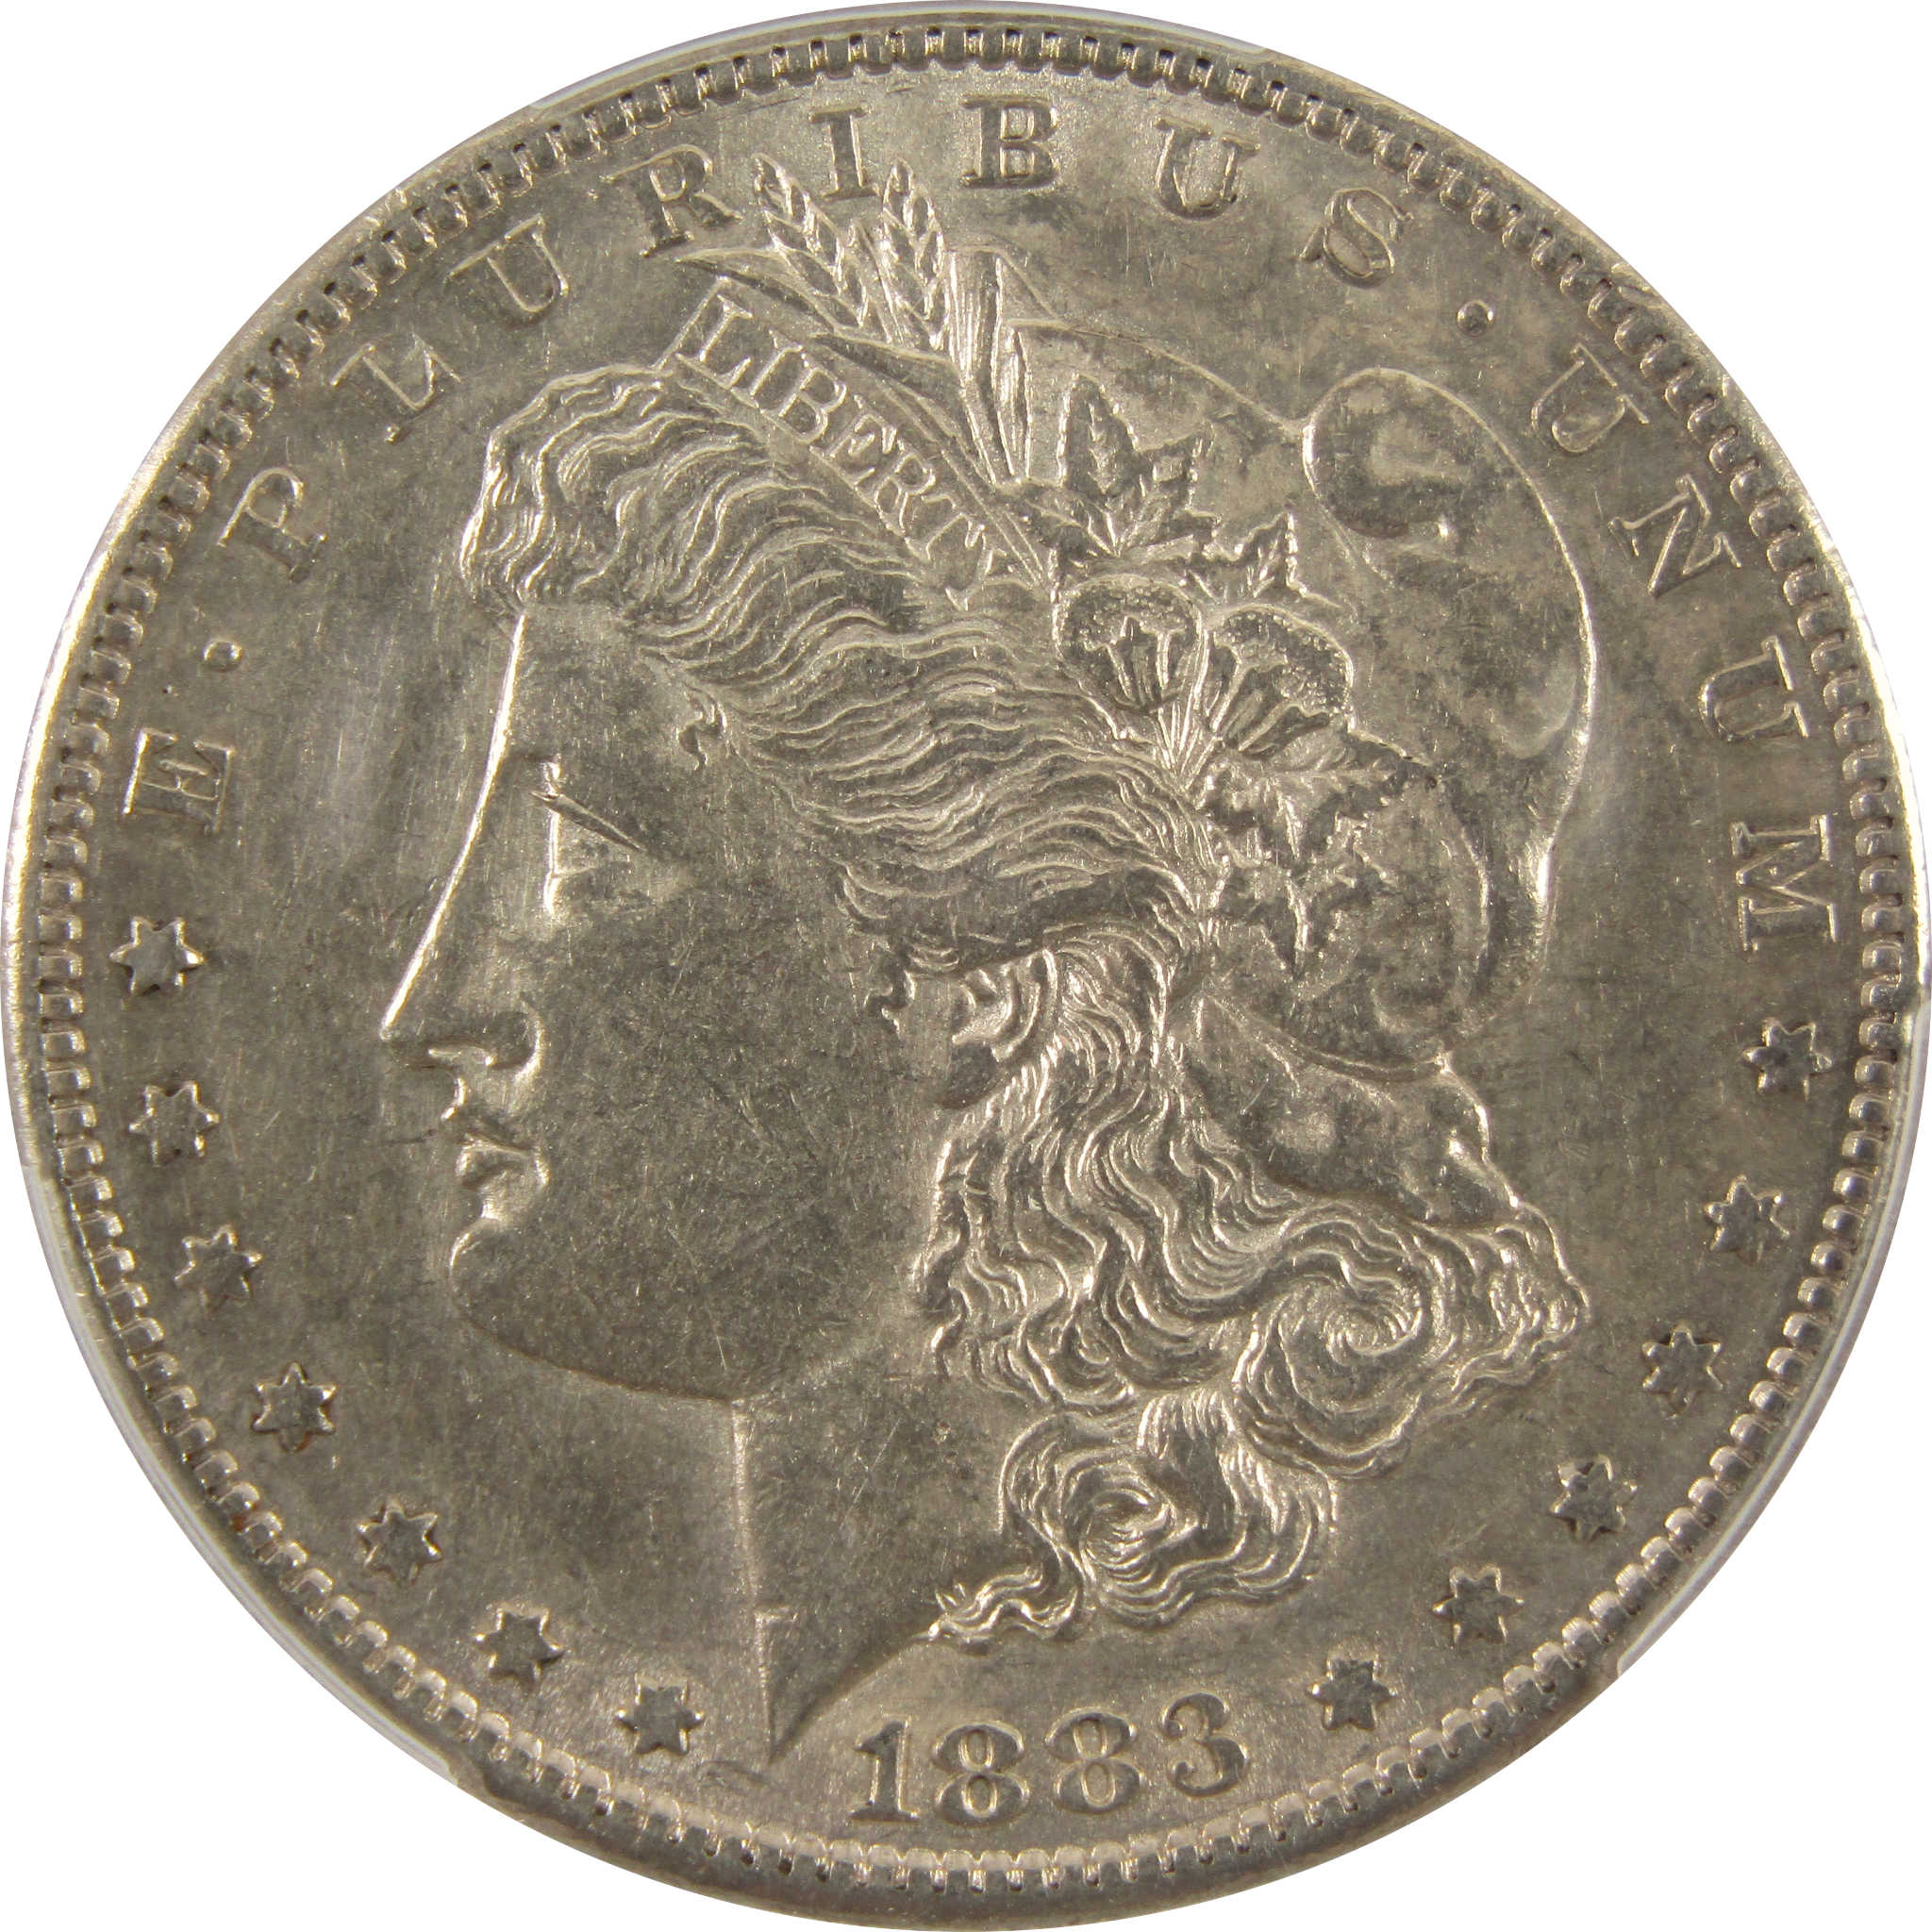 1883 S Morgan Dollar XF 45 PCGS 90% Silver $1 Coin SKU:I10703 - Morgan coin - Morgan silver dollar - Morgan silver dollar for sale - Profile Coins &amp; Collectibles